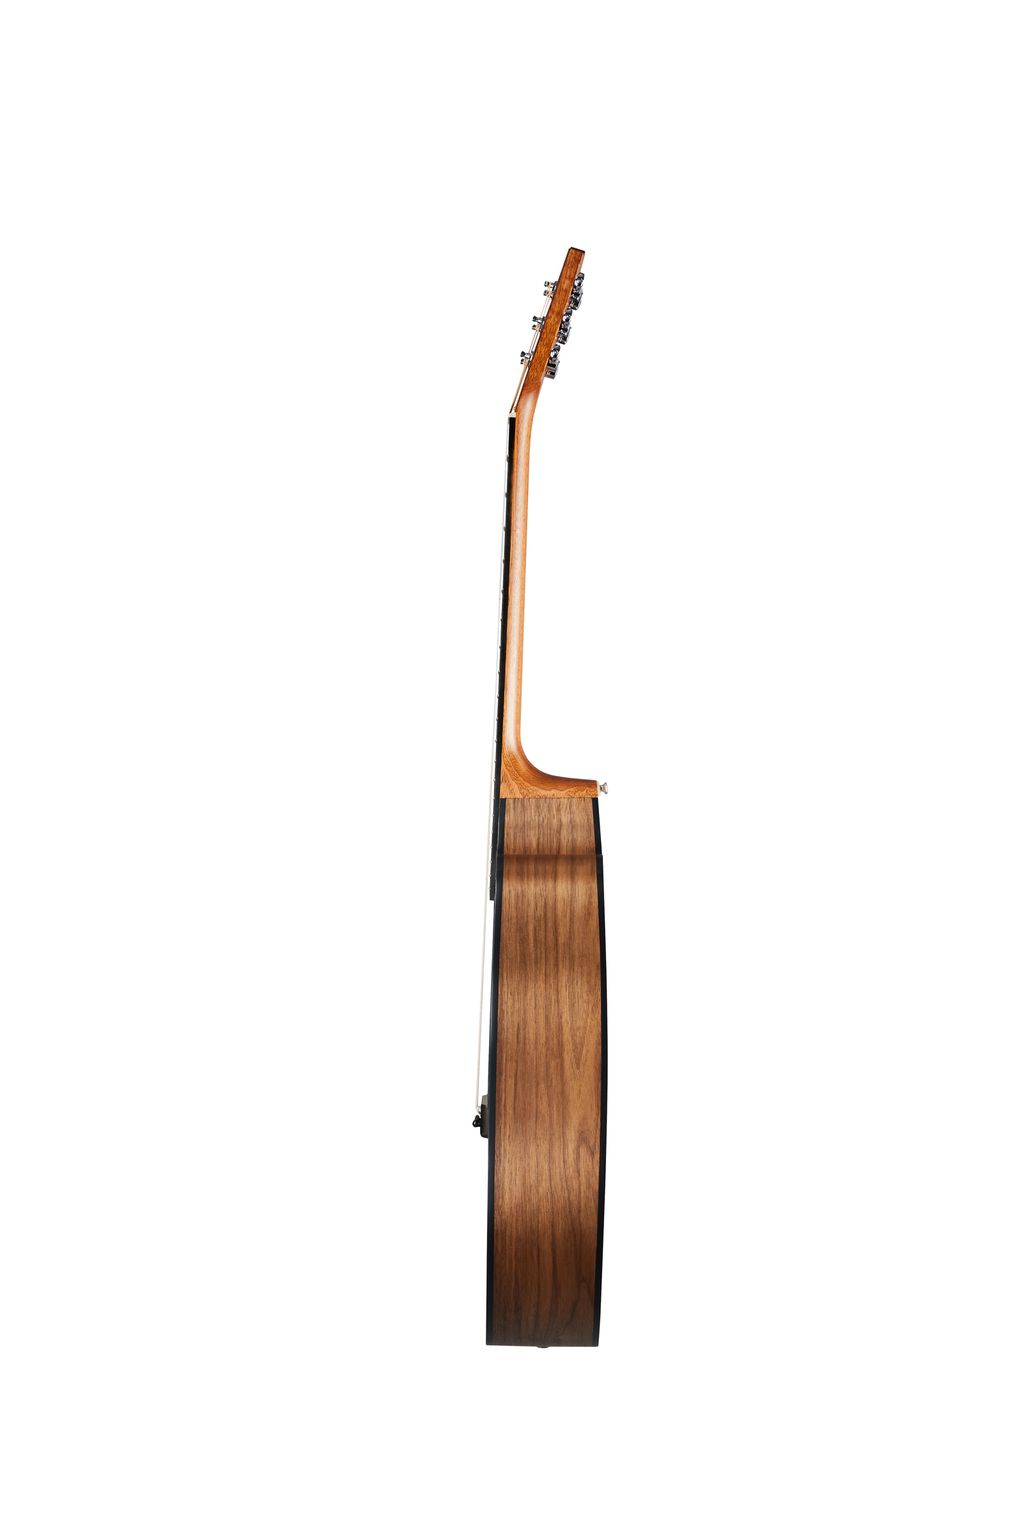 __static.gibson.com_product-images_Acoustic_ACCBYP64_Natural_MCSSGWAN_Side